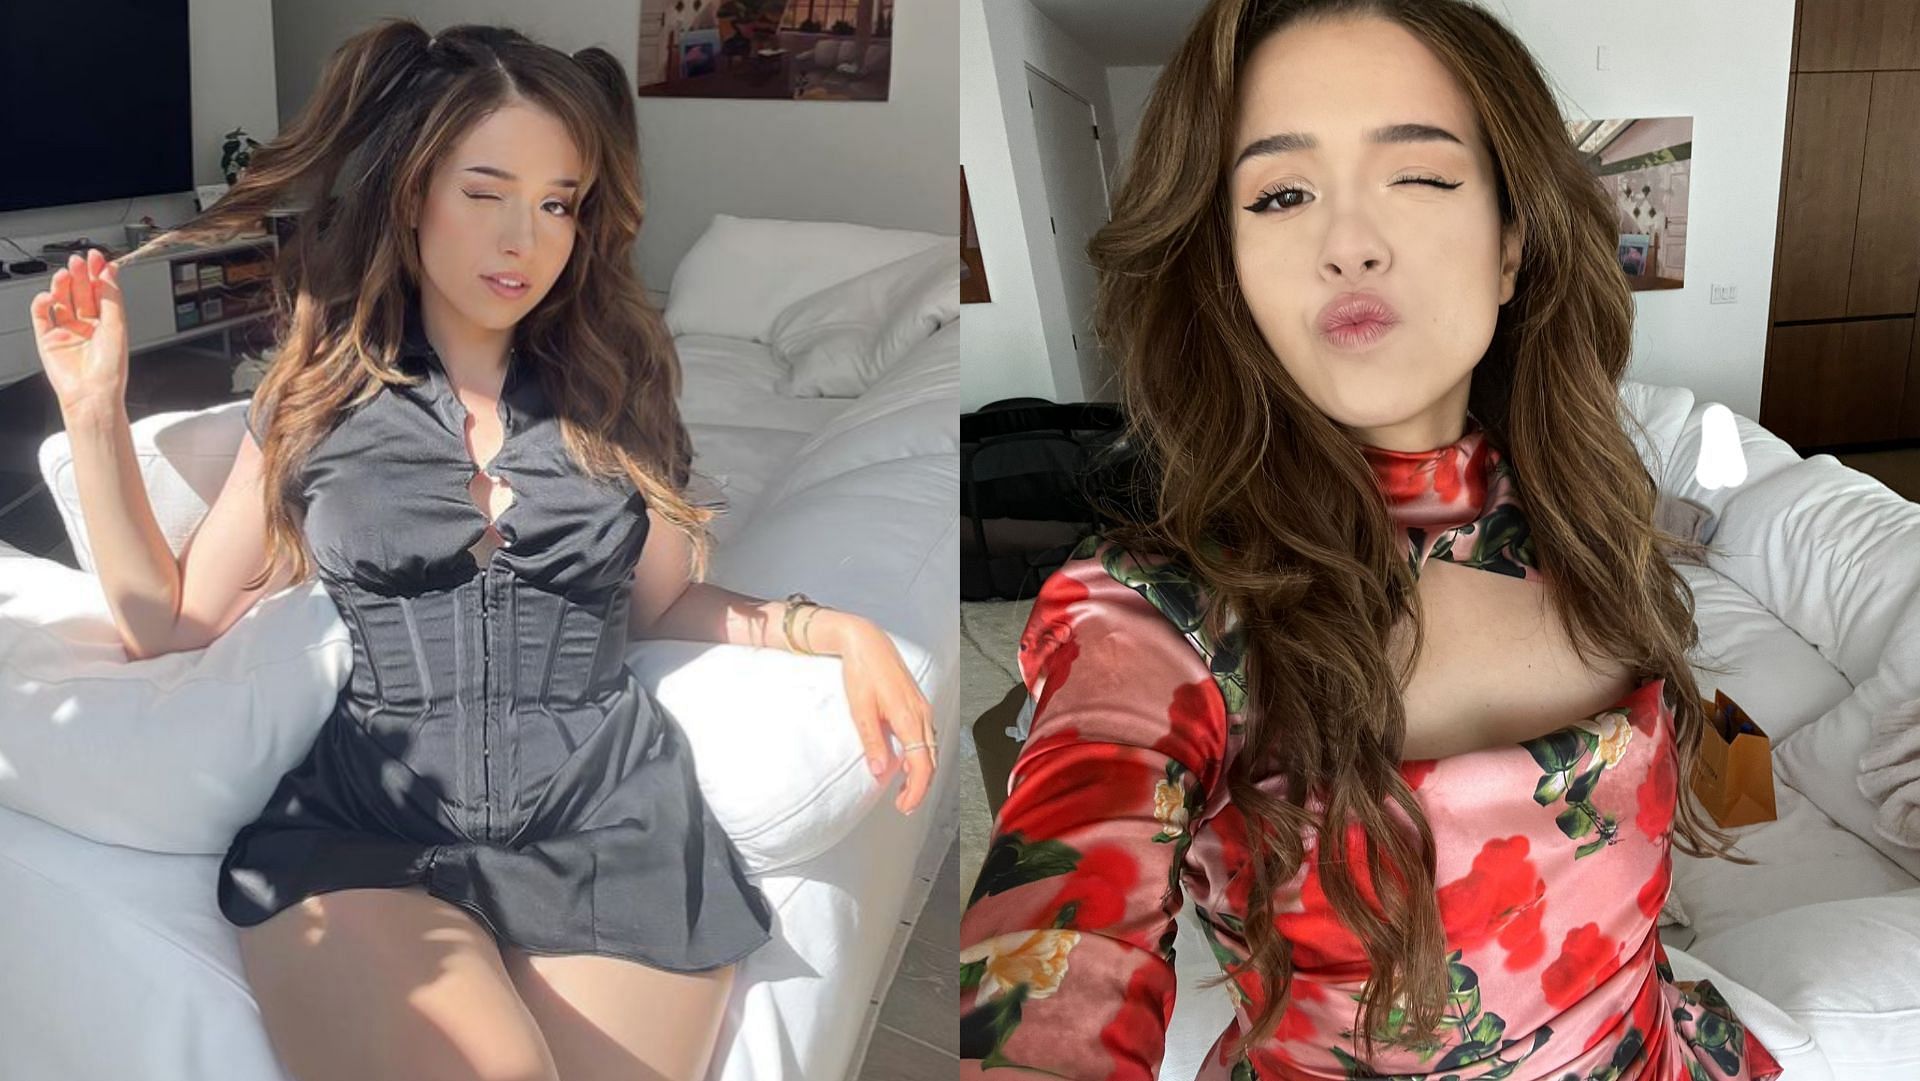 Pokimane calls out Twitch to ban gambling streams following ItsSliker controversy (Image via Sportskeeda)